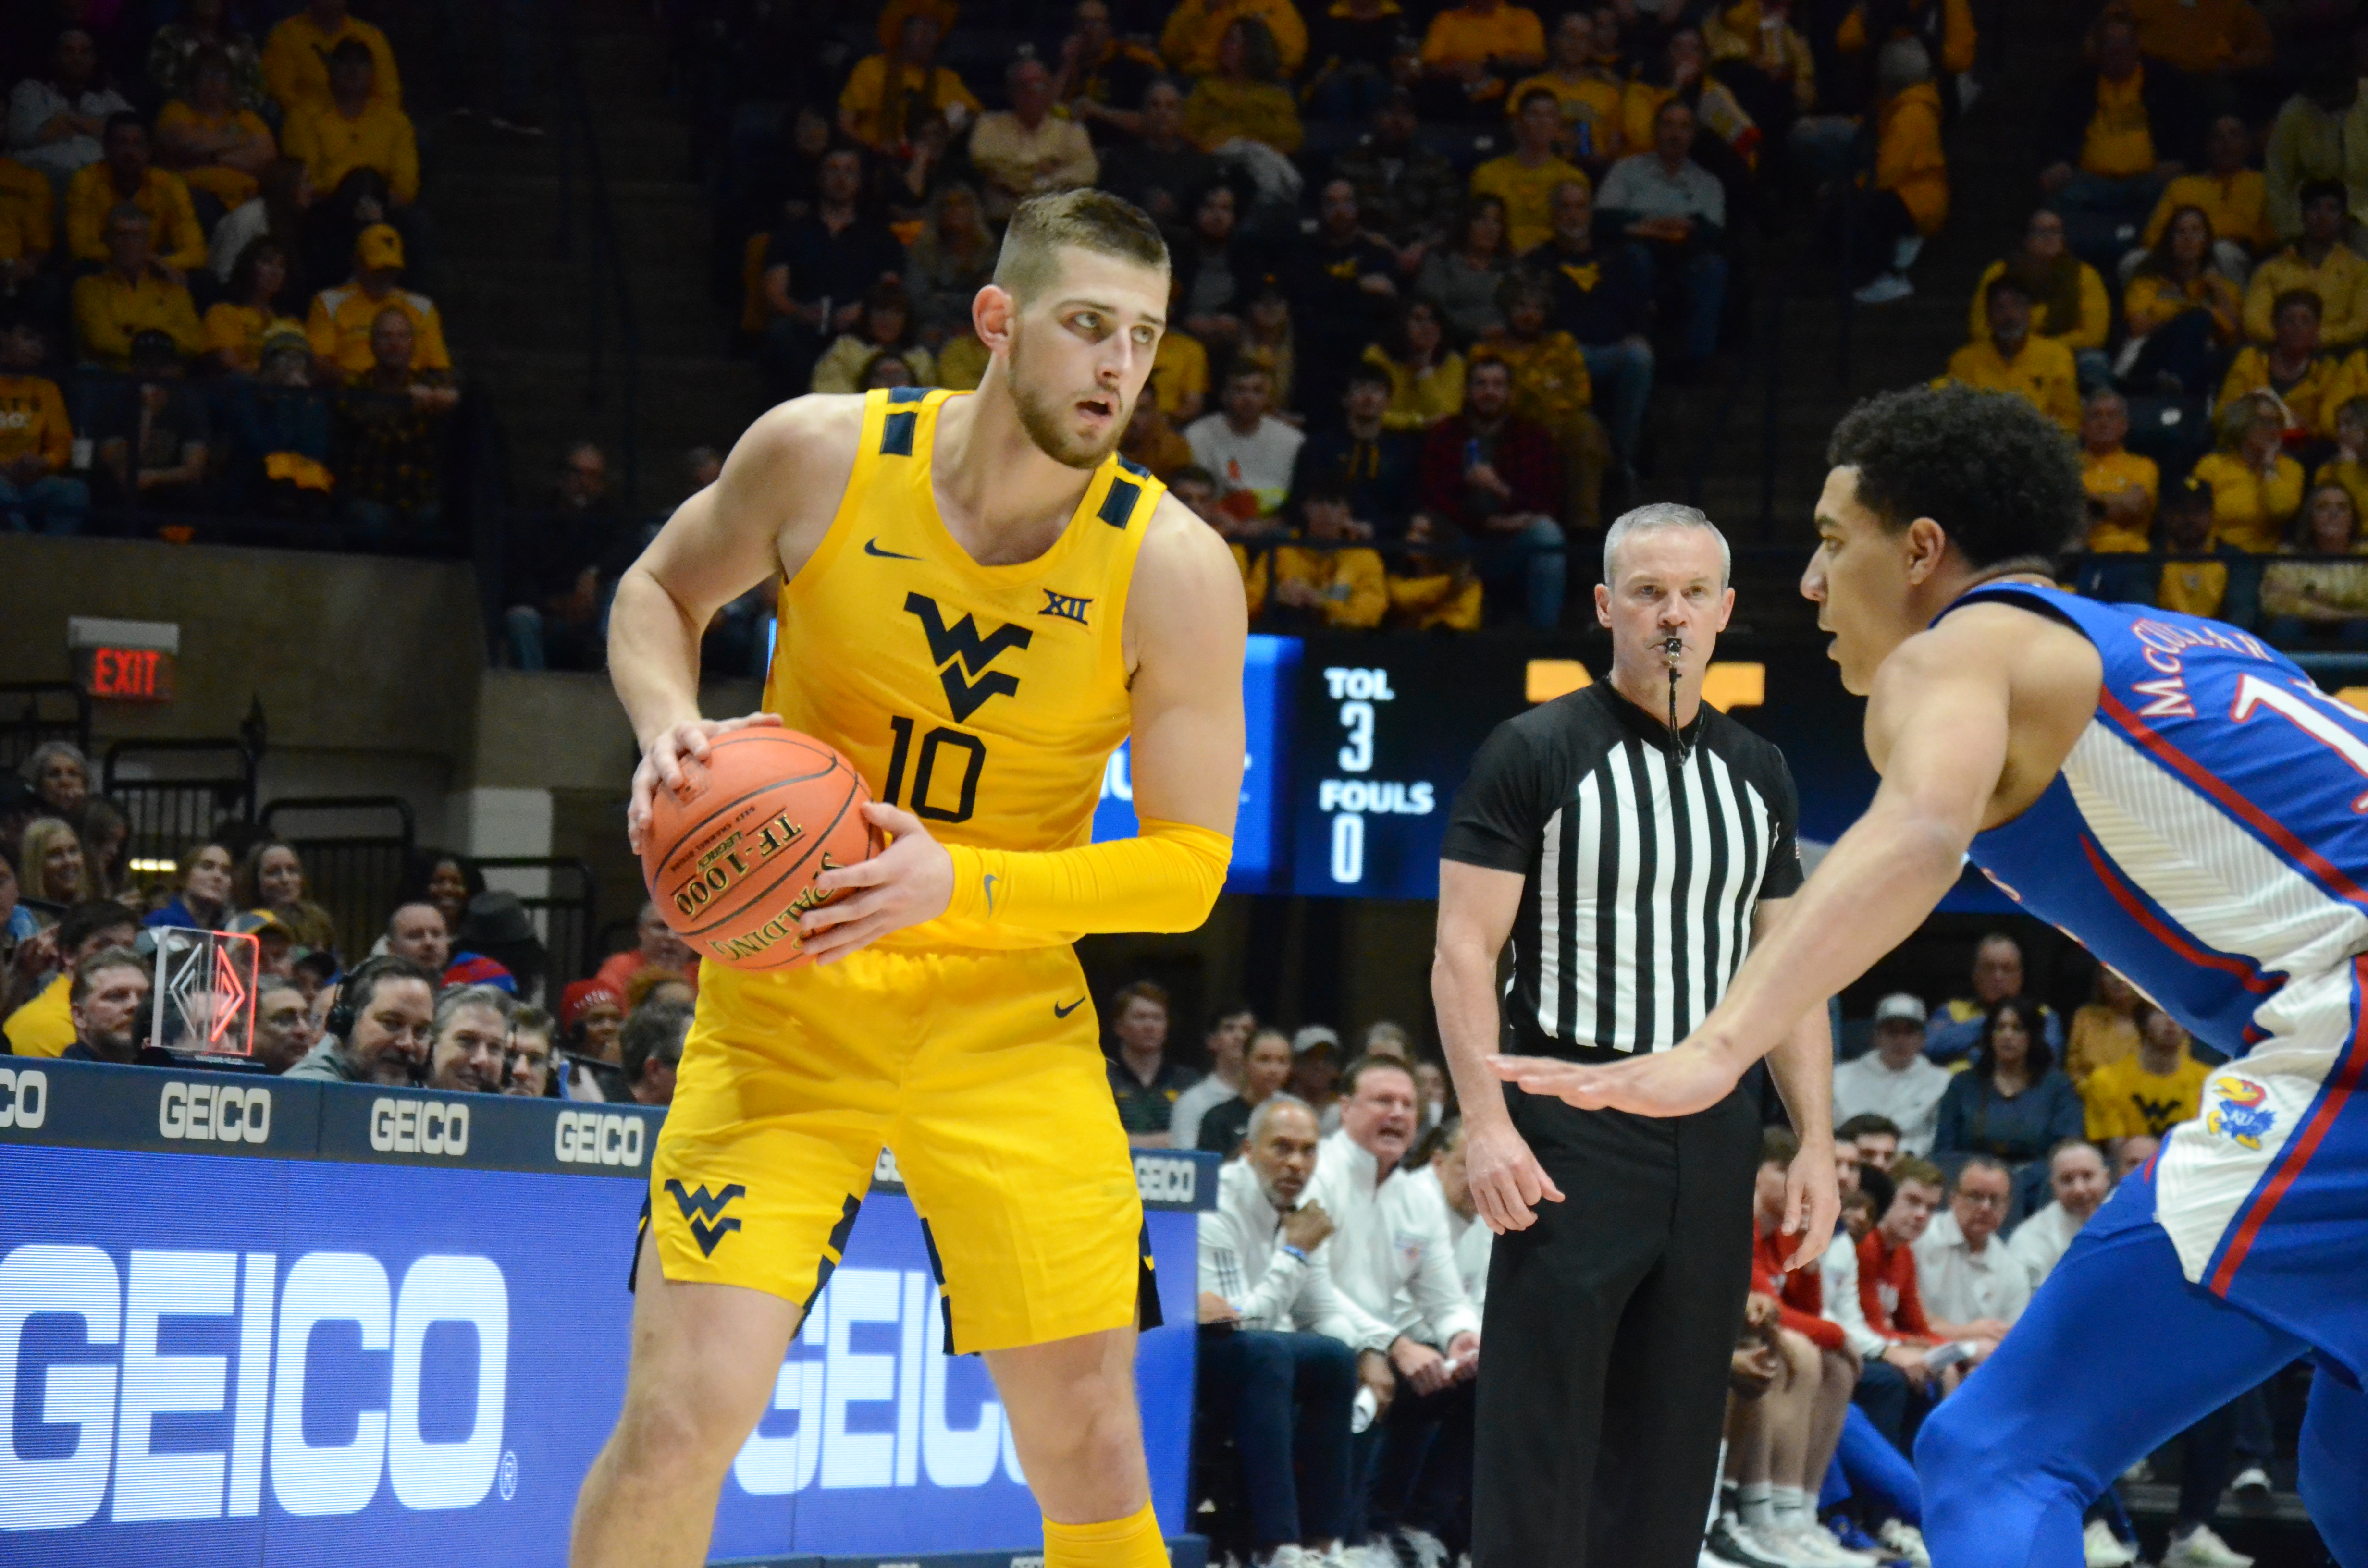 How to Watch, Listen, & Receive LIVE Updates of WVU vs. Baylor Sports